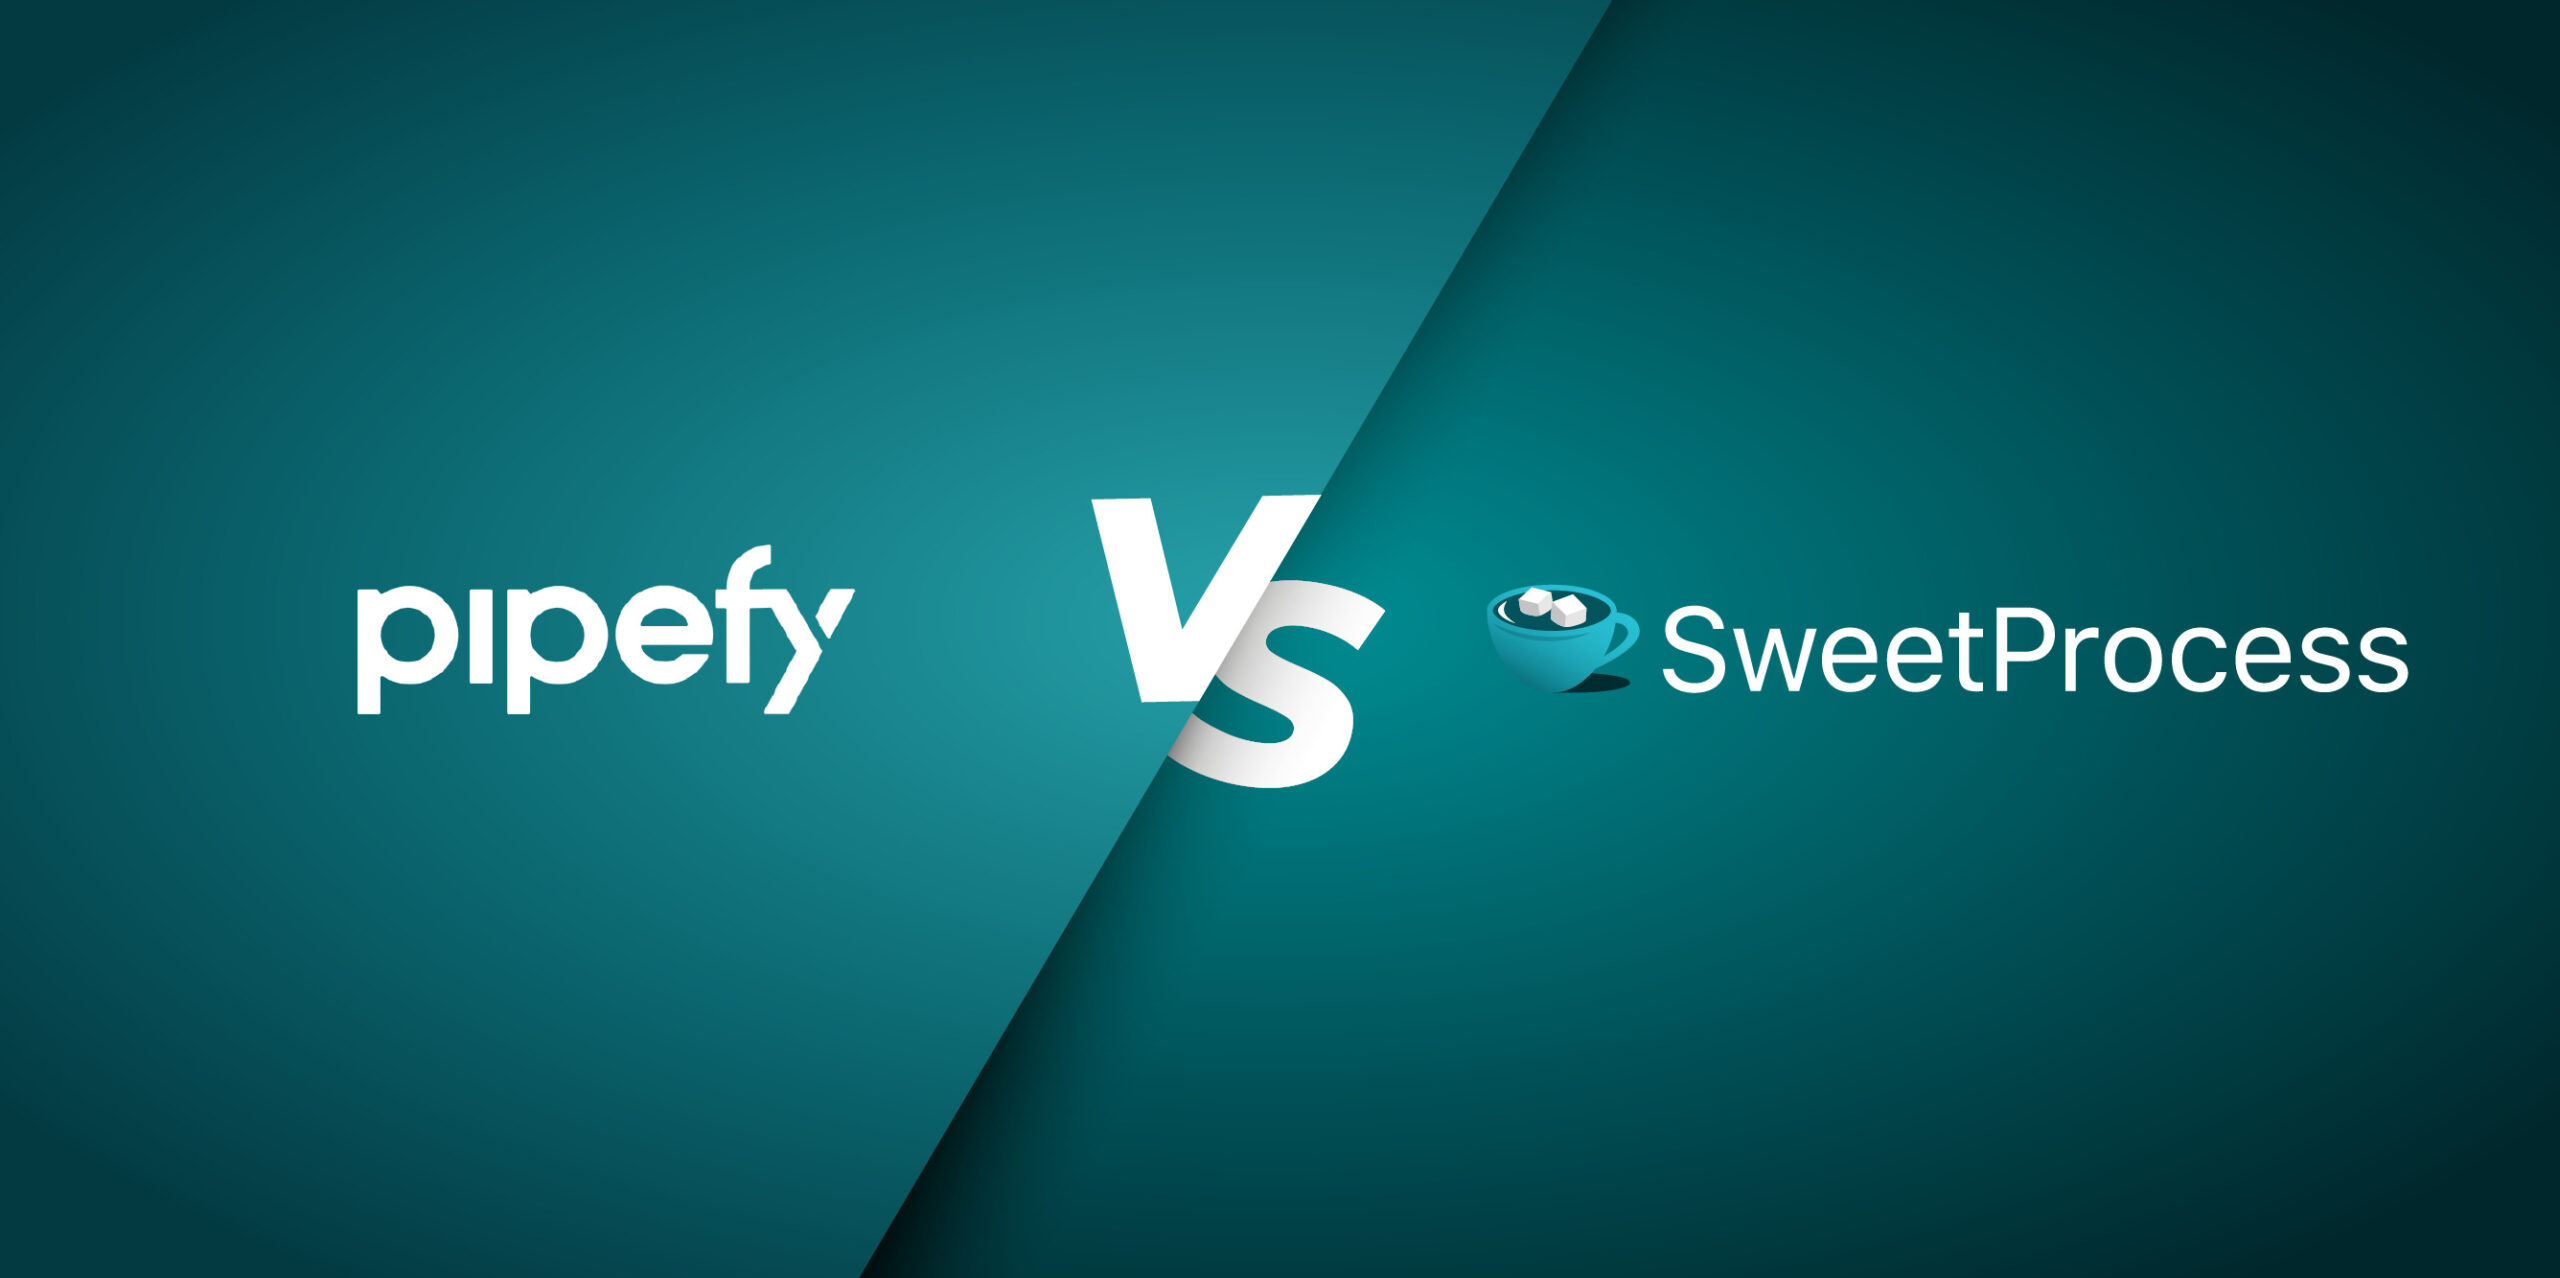 Pipefy vs. SweetProcess: Which is best for Documenting Policies, Processes, and Procedures